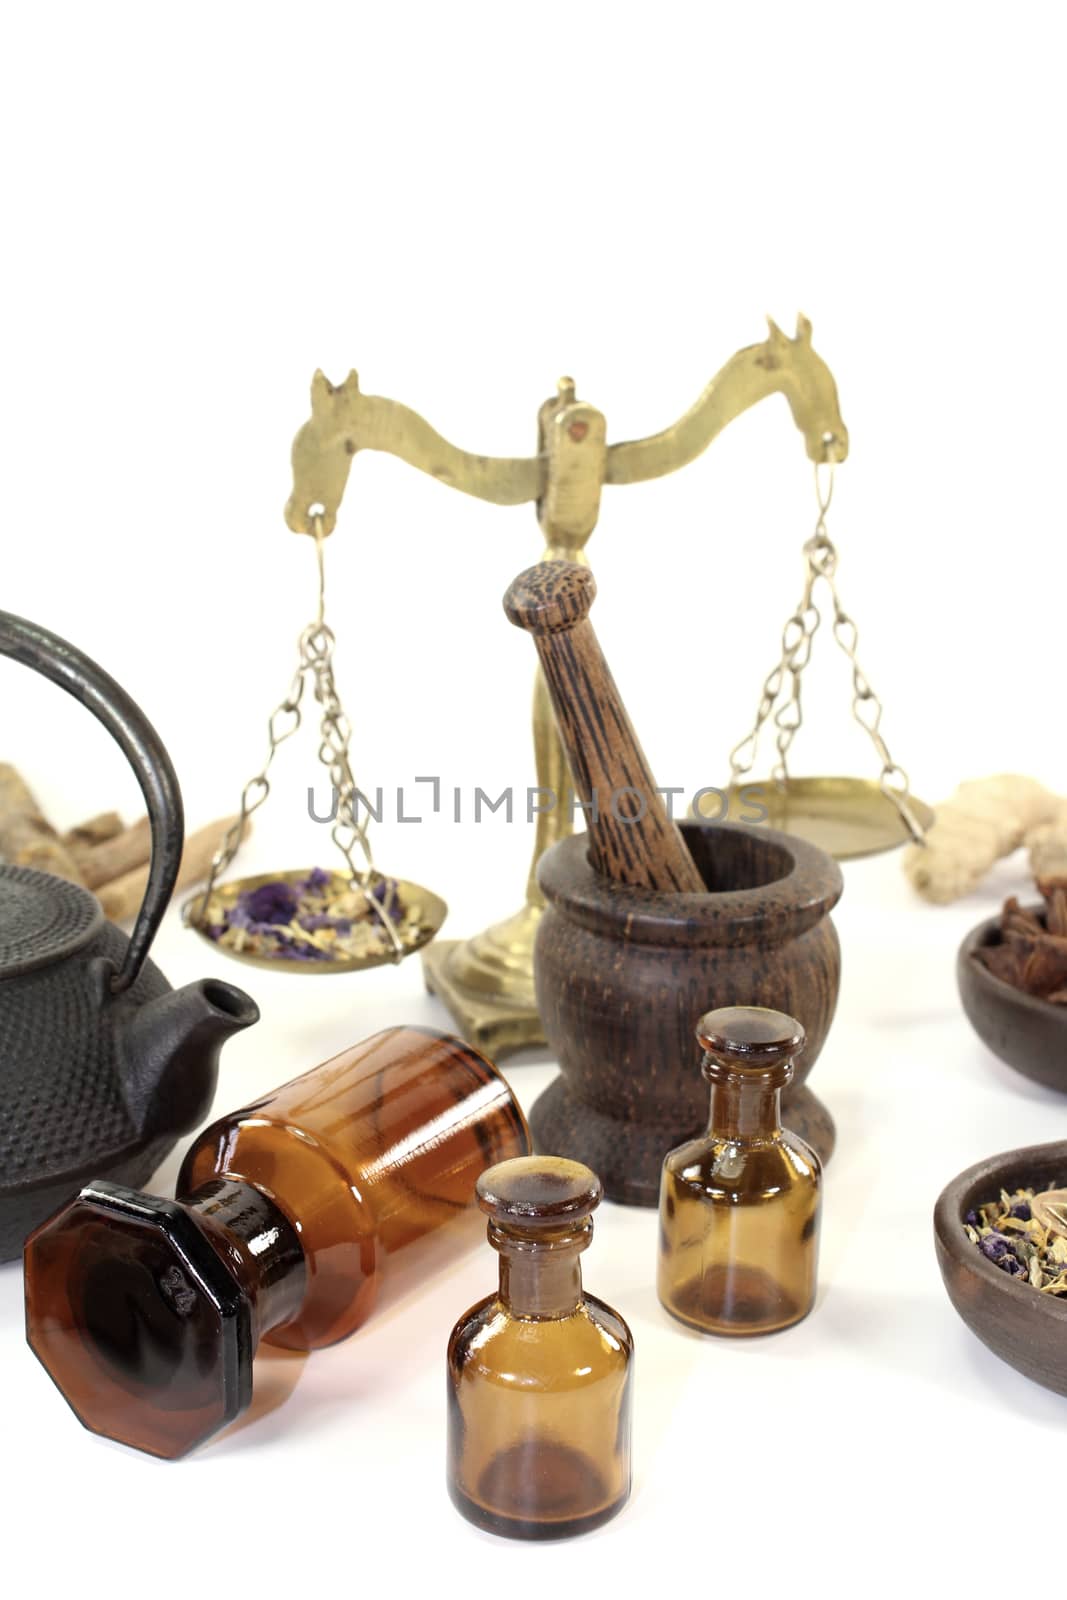 Chinese medicine with mortar and teapot by discovery